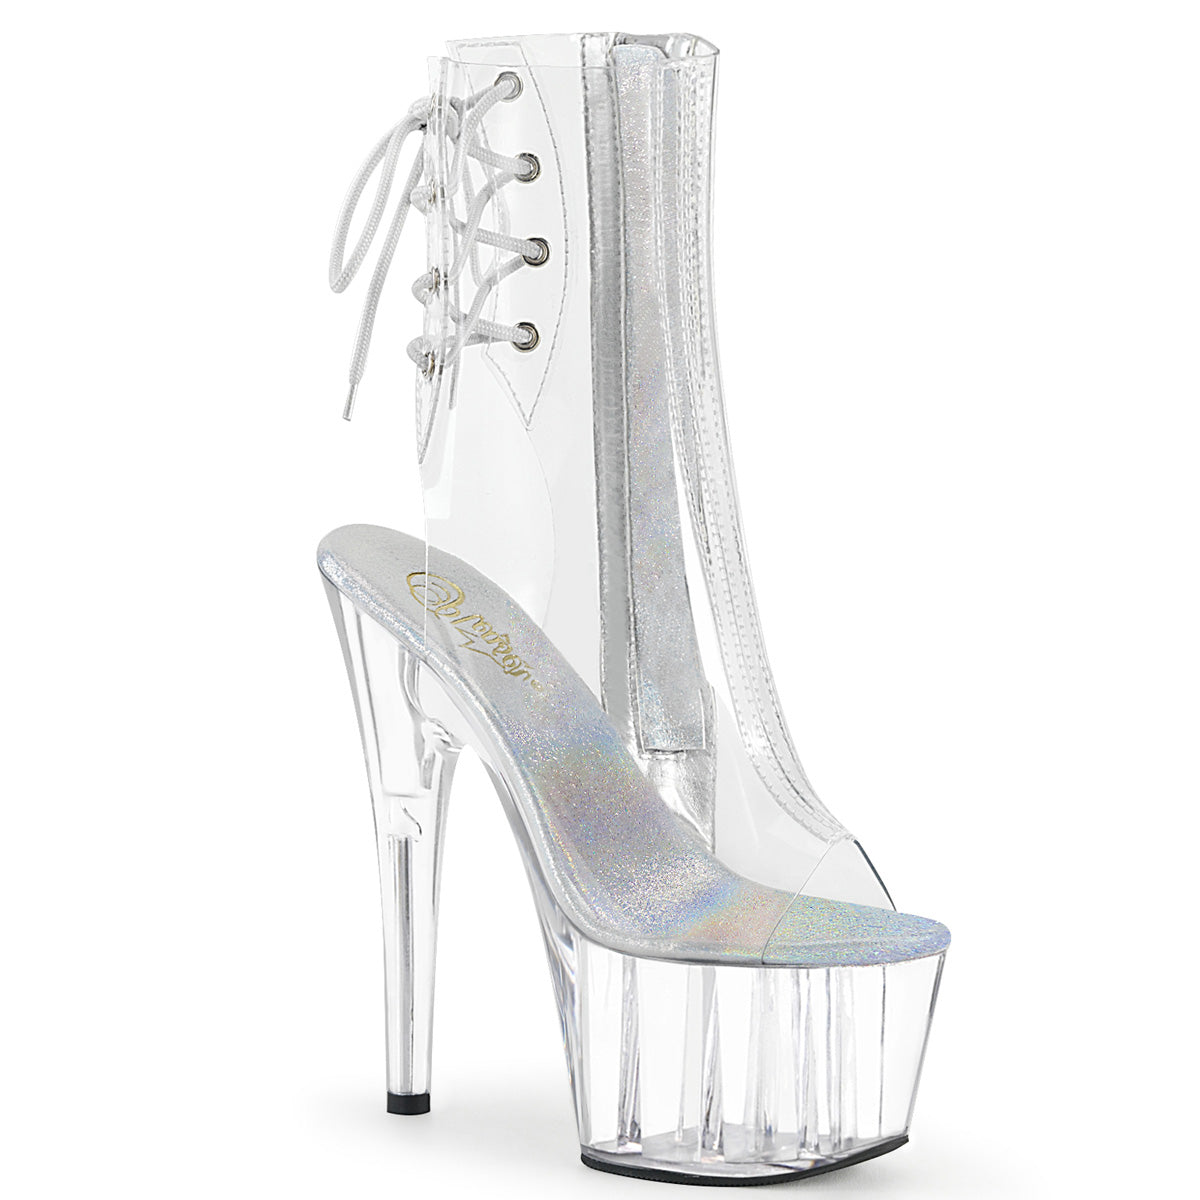 ADORE-1018C Pleasers 7 Inch Heel Clear Pole Dancing Ankle Boots